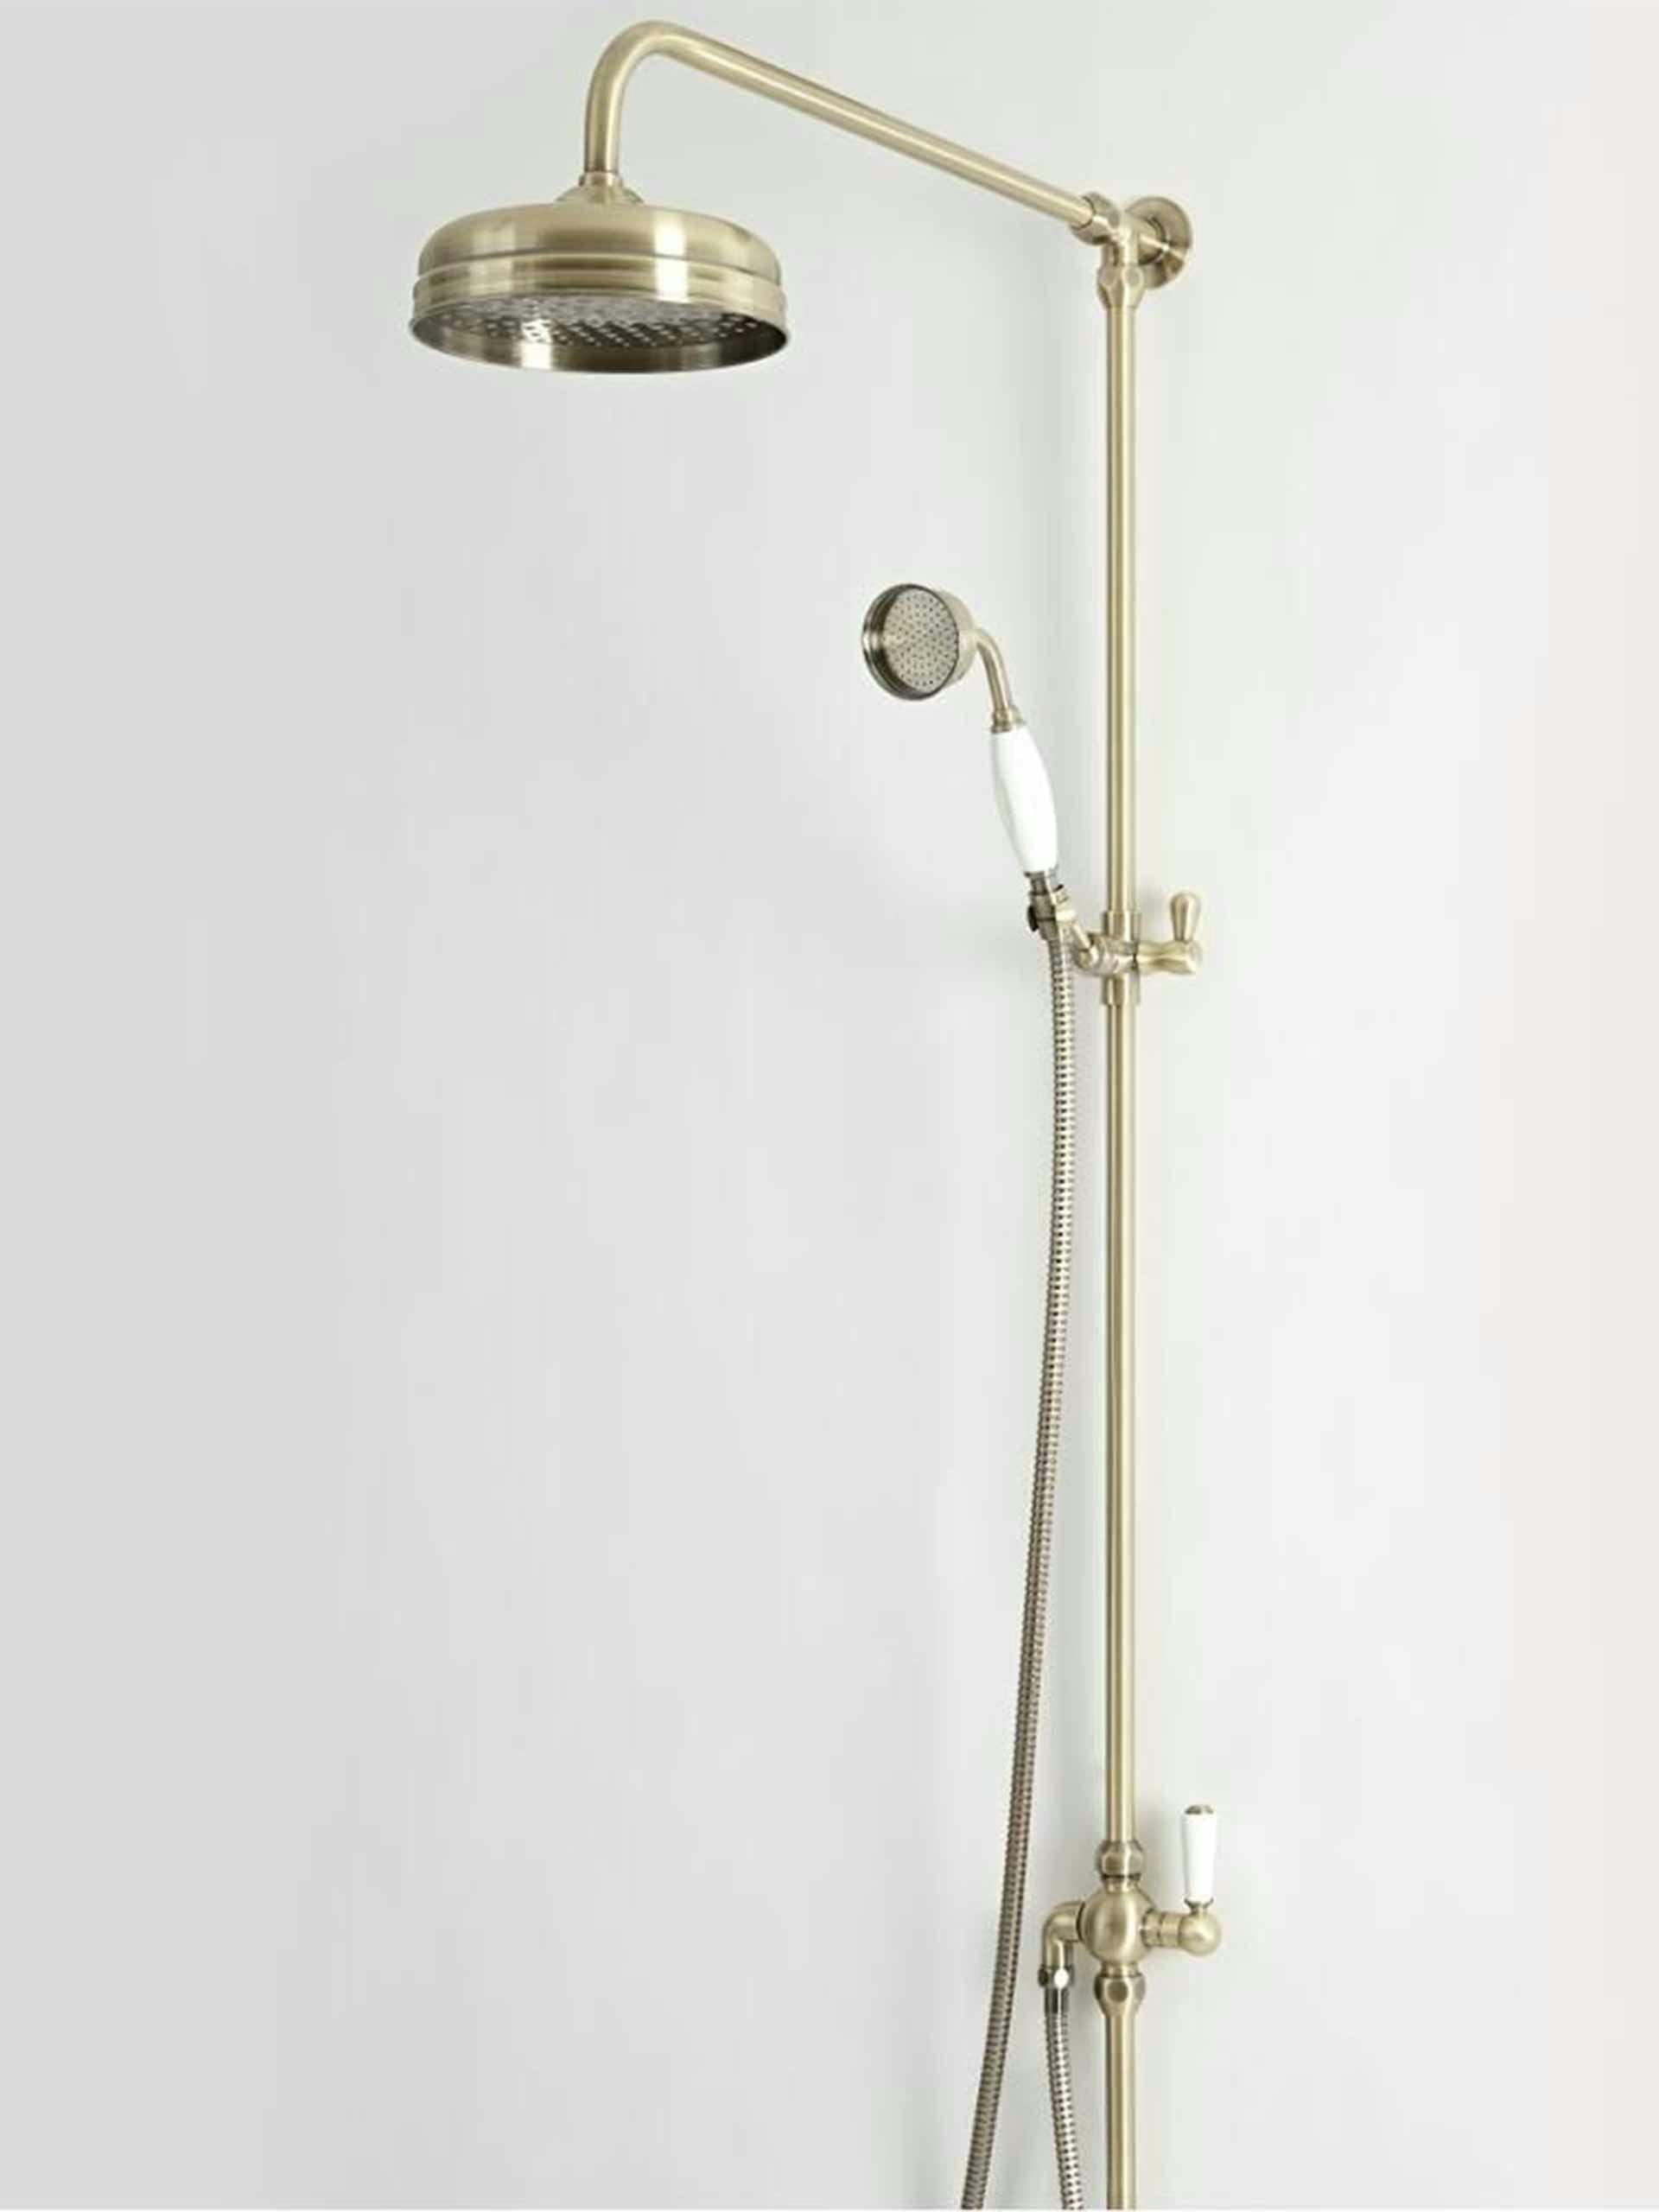 Grand shower with brushed gold finish